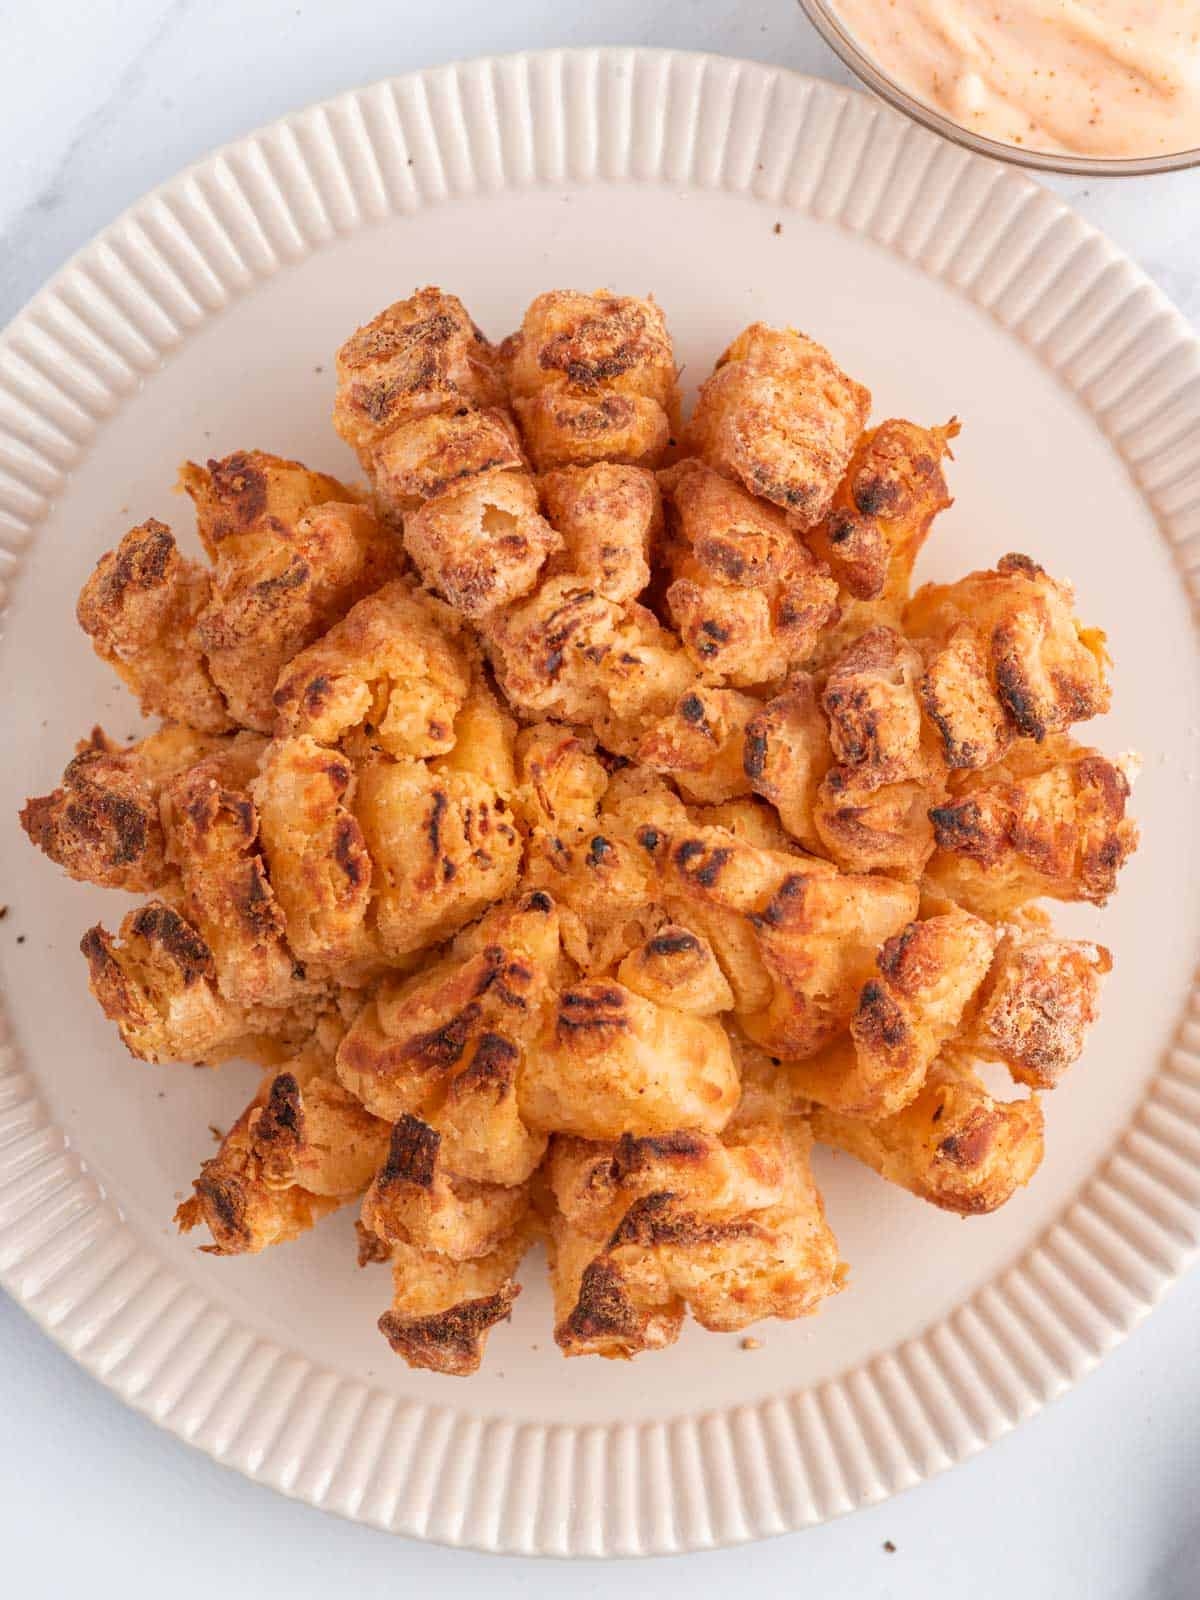 https://www.cookinwithmima.com/wp-content/uploads/2022/12/homemade-bloomin-onion.jpg